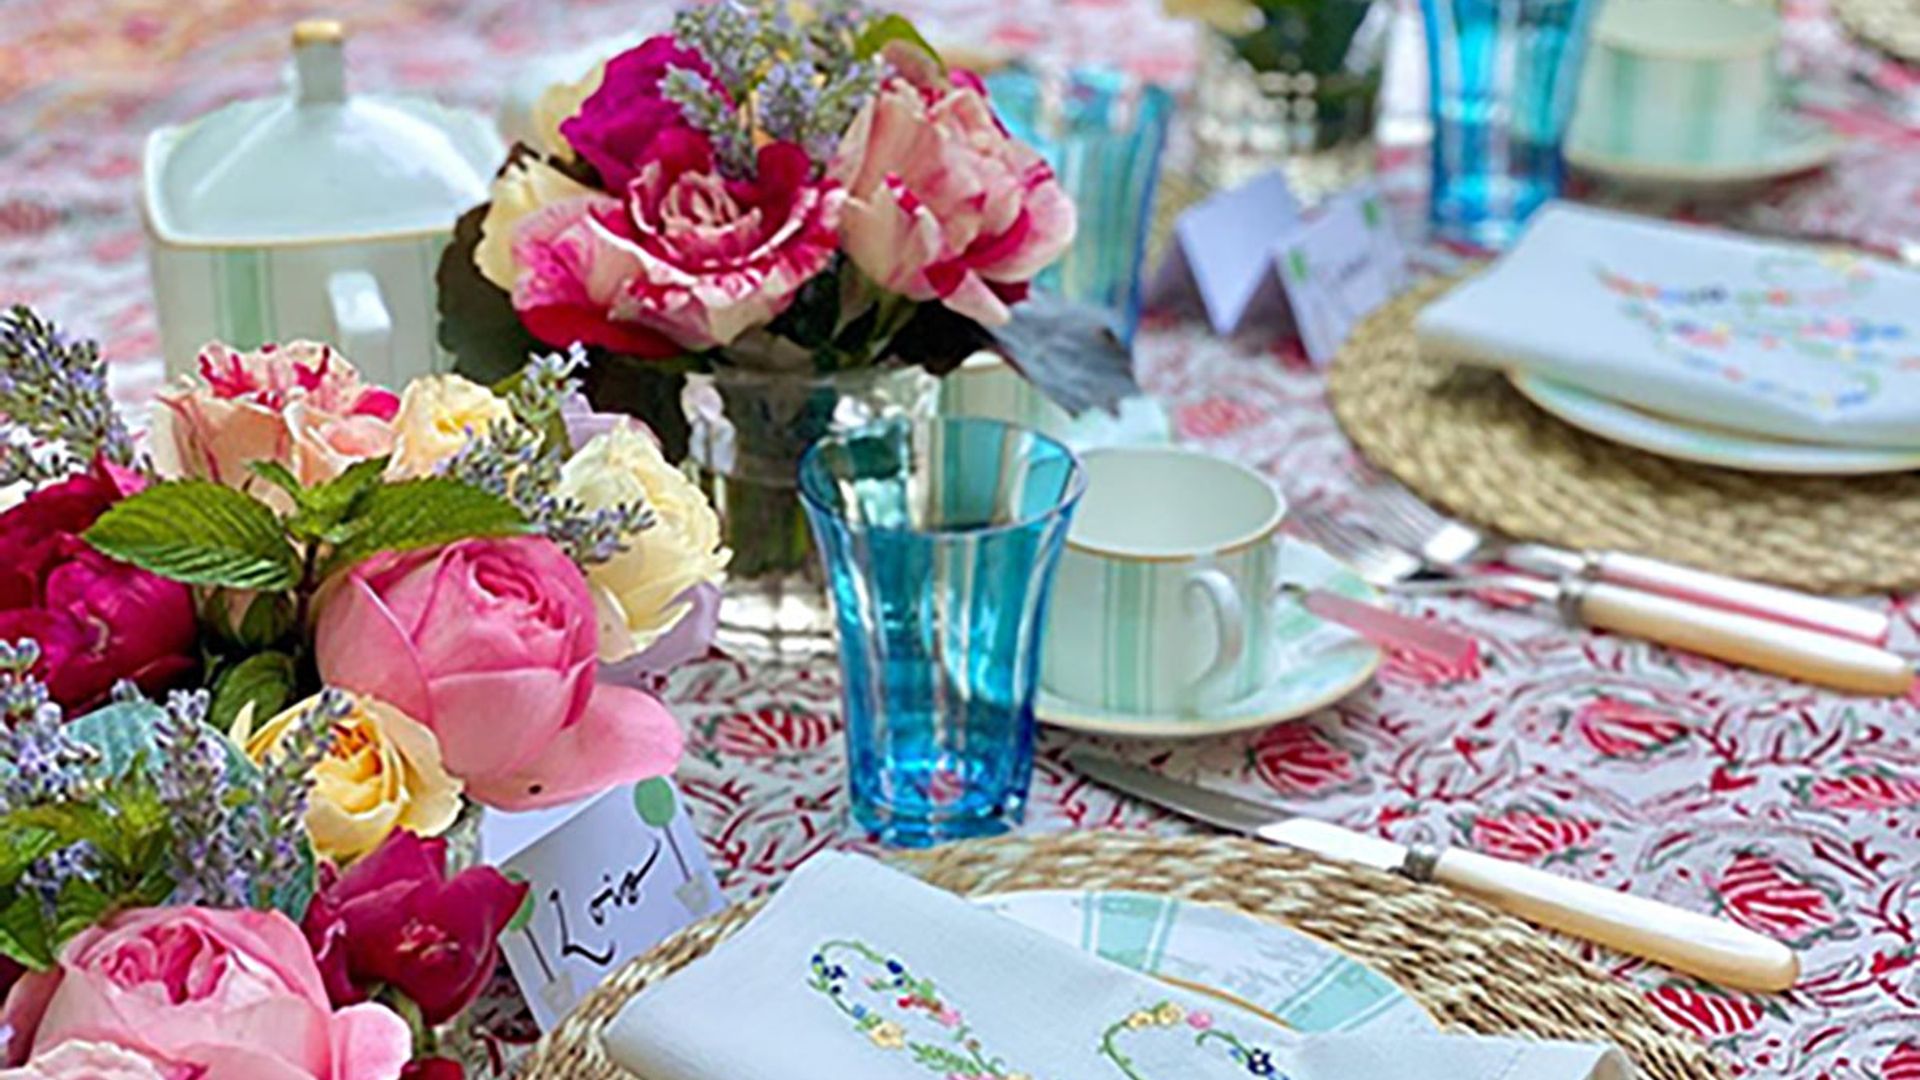 LAY-London-Spring-tablescape